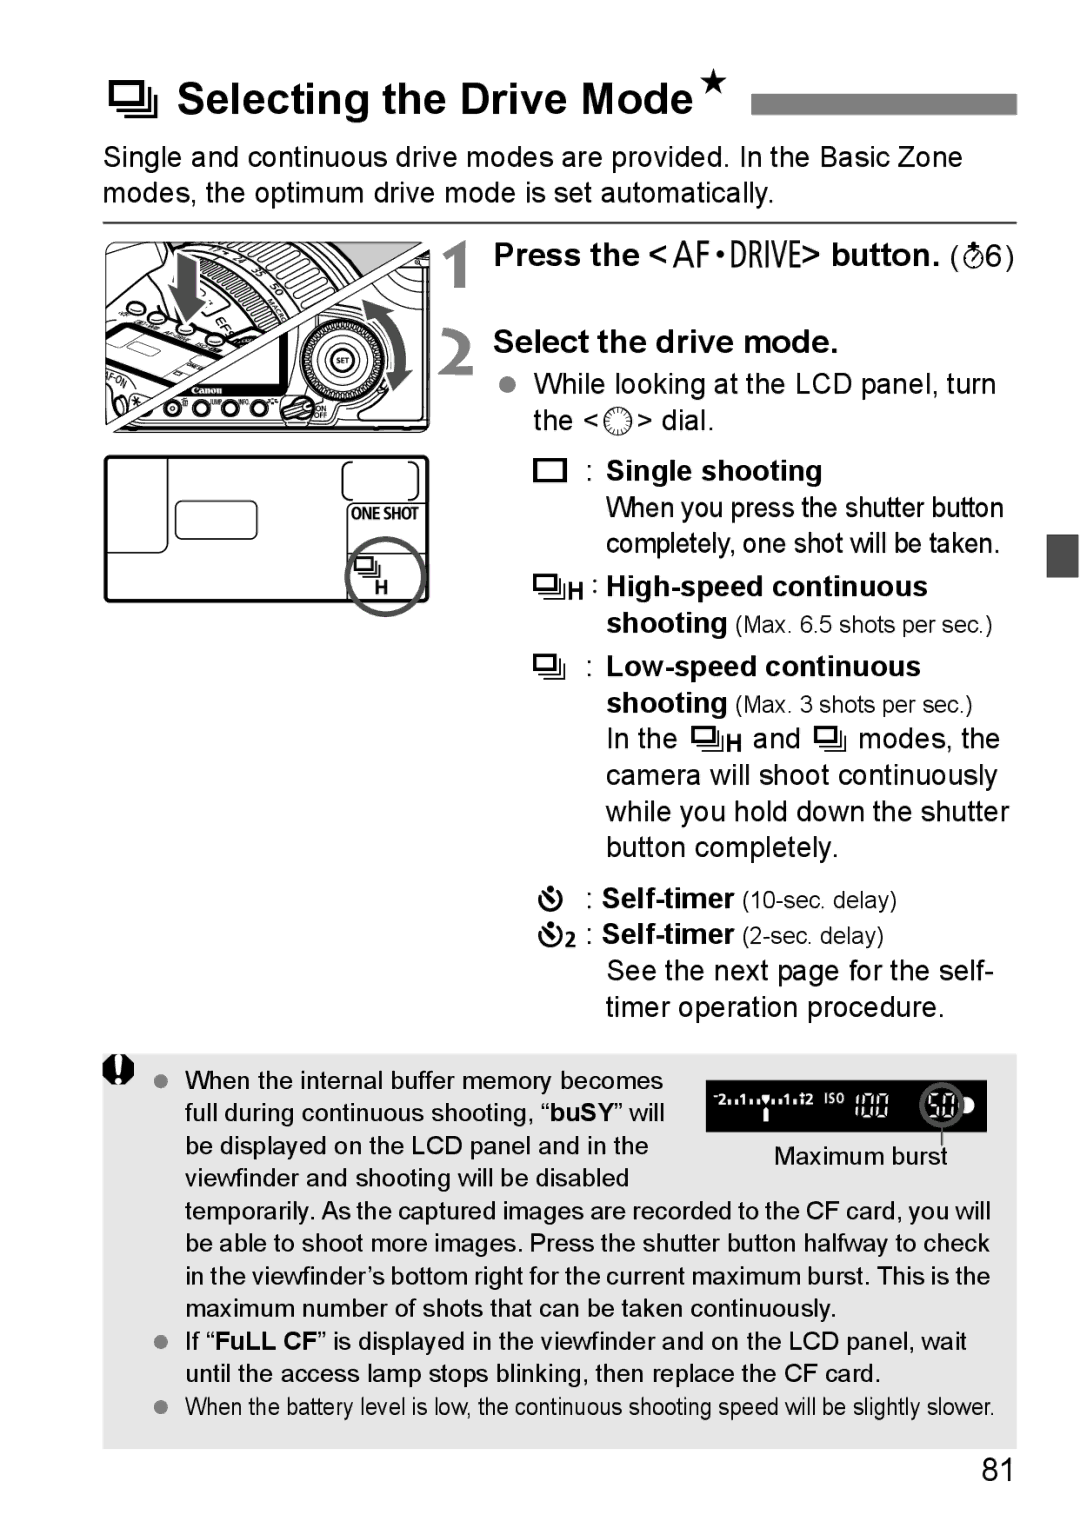 Canon EOS40D instruction manual ISelecting the Drive ModeN, Press the o button Select the drive mode, Single shooting 